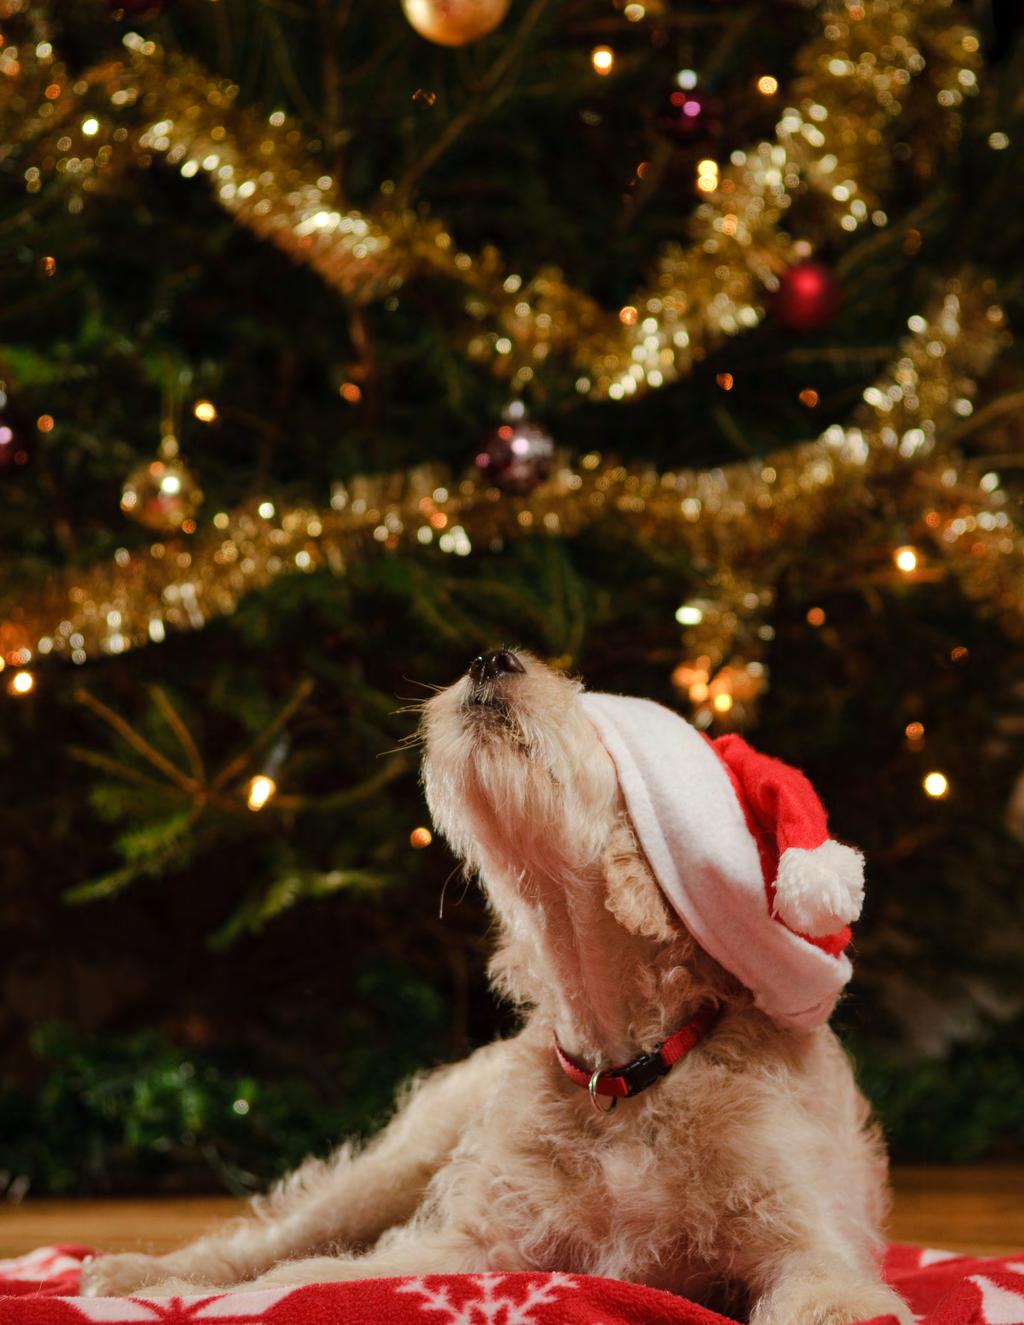 The Christmas Survival Guide Helping to keep humans & hounds happy over the festive season.